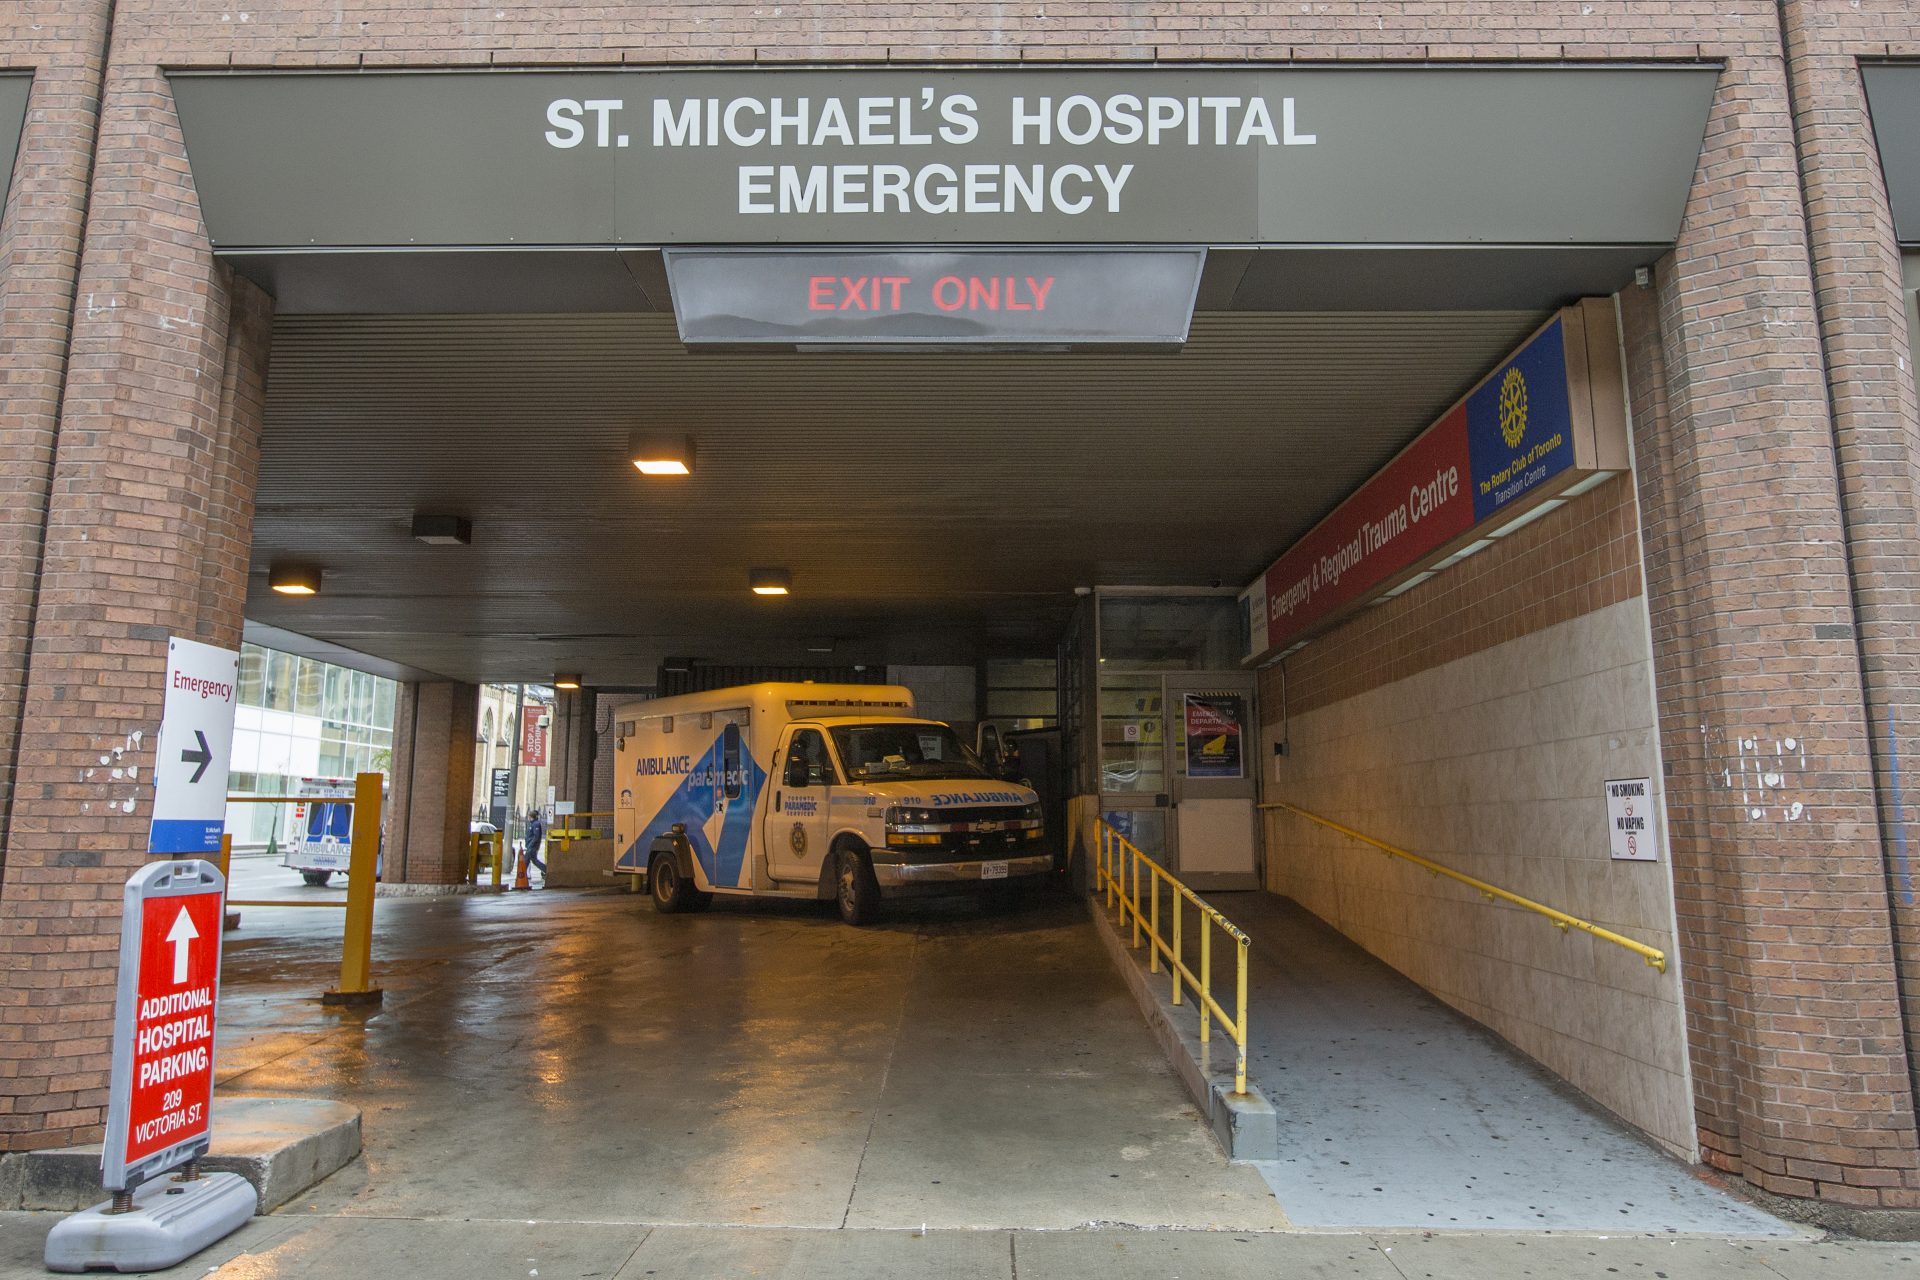 Implemented at St. Michael's Hospital